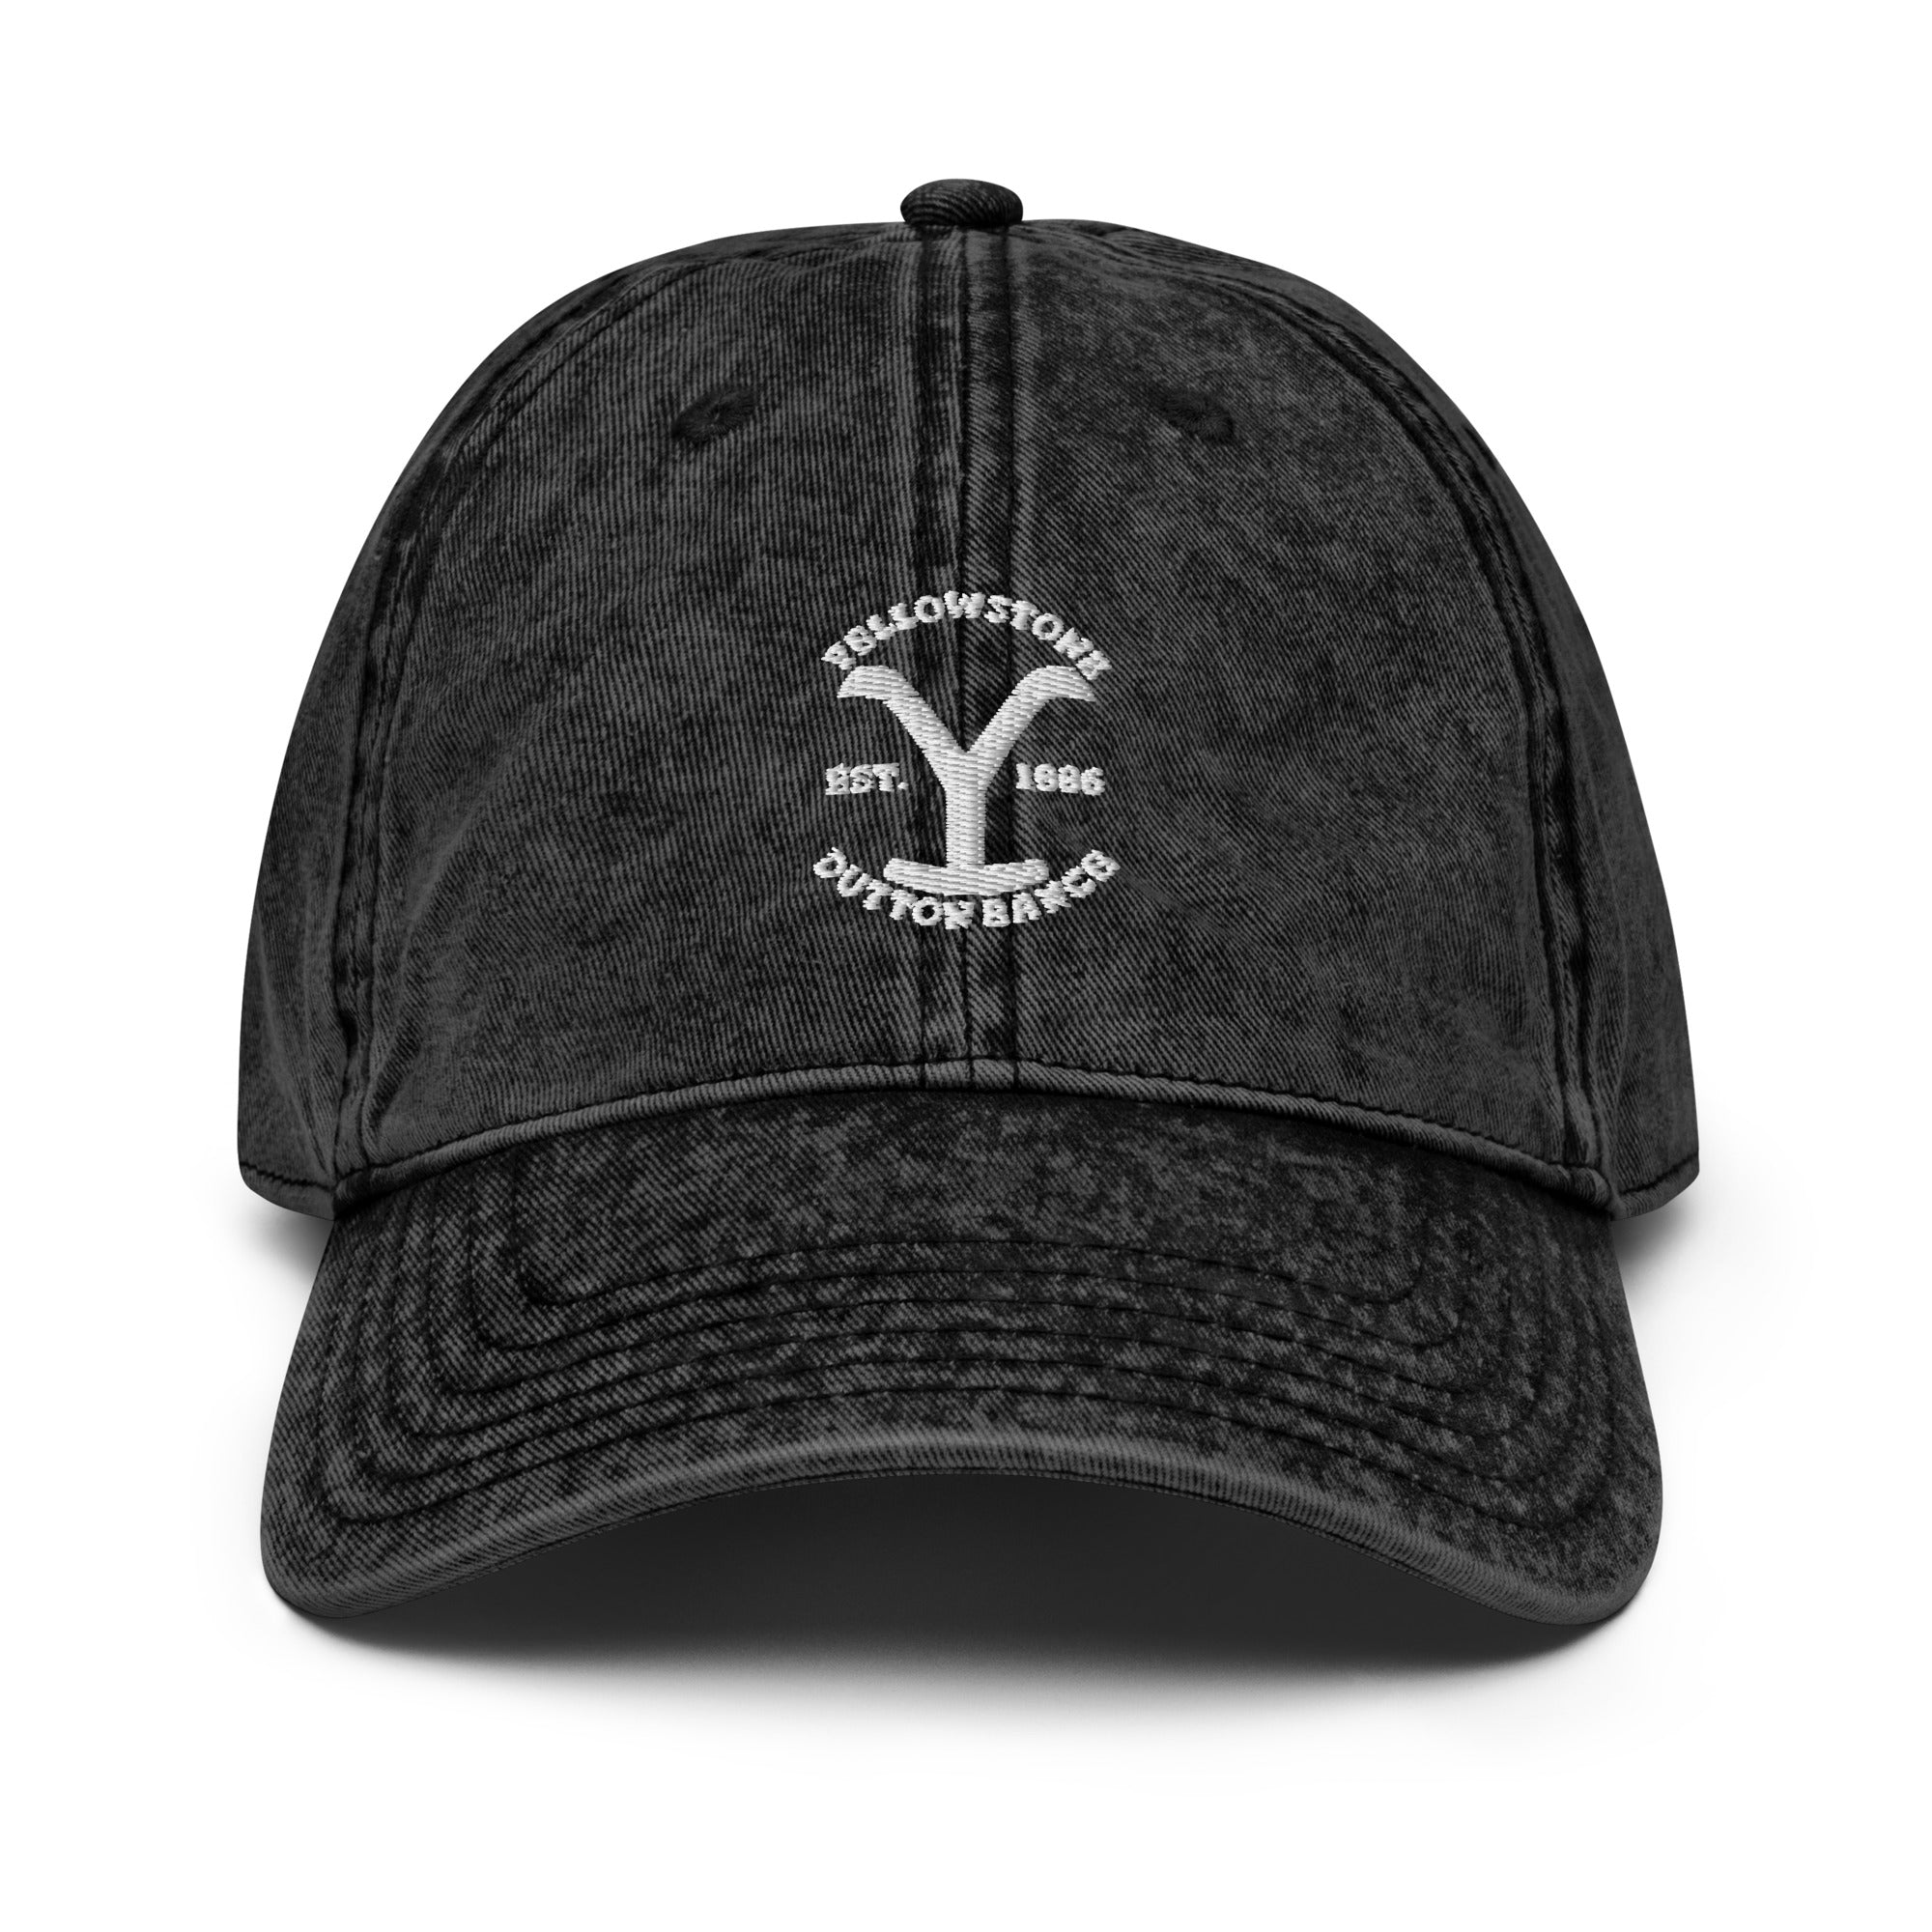 Yellowstone TV Show- Vintage Cotton Twill Cap - Creations by Chris and Carlos